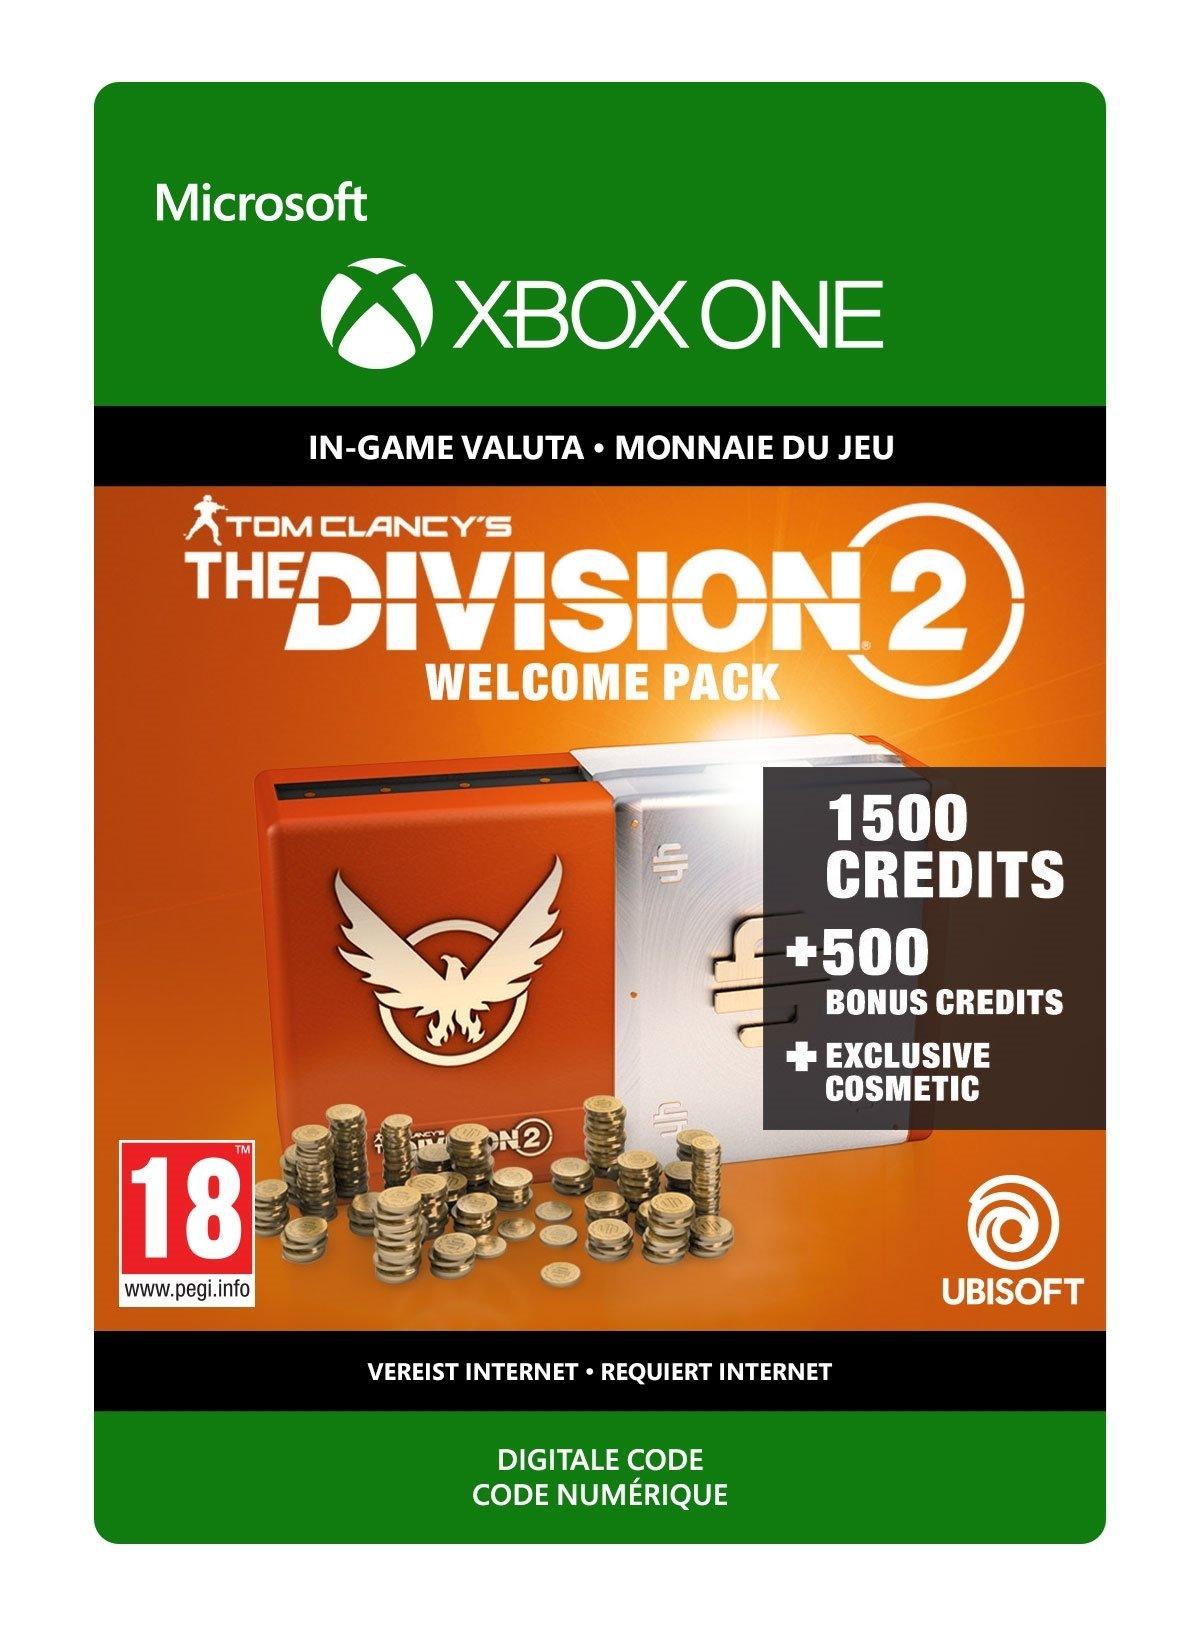 Tom Clancy's The Division 2: Welcome Pack - Xbox One - Add-on | 7D4-00354 (87fdd376-6ba5-0e40-aa05-c601f5d759ac)